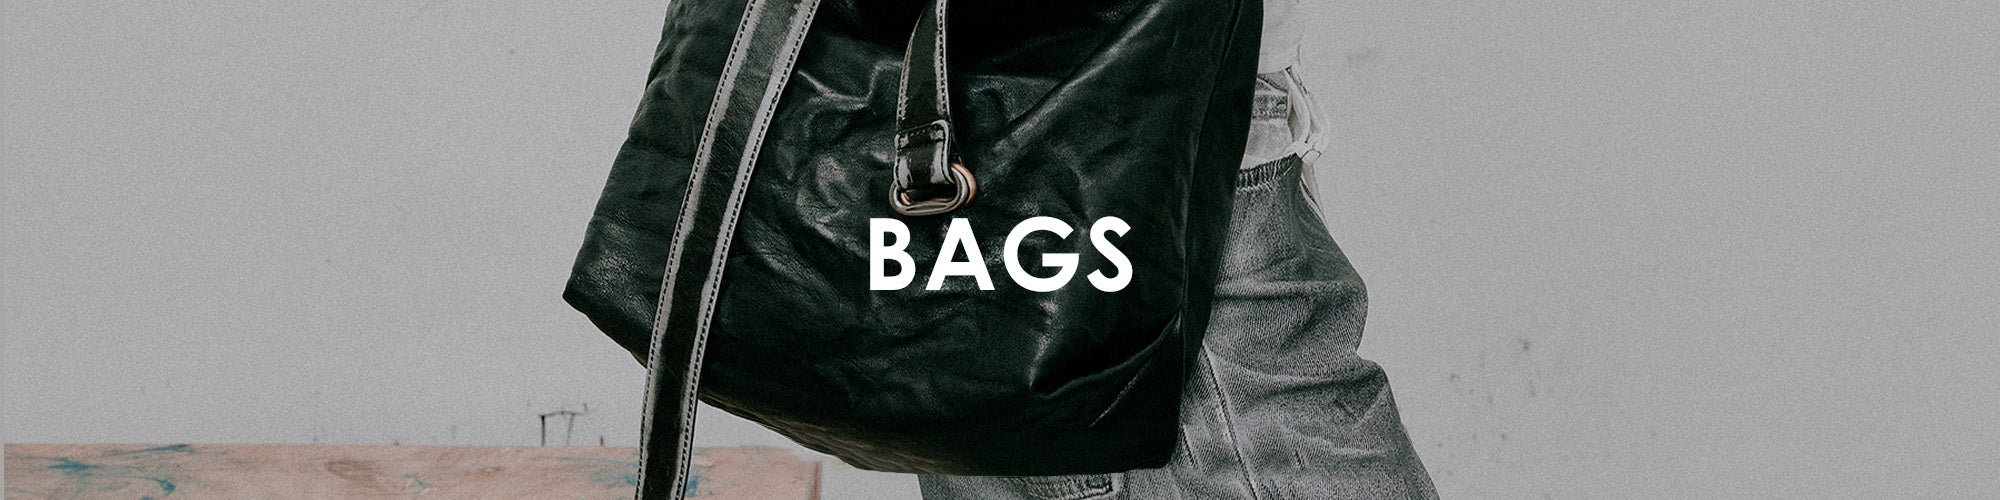 BAGS FOR WOMEN